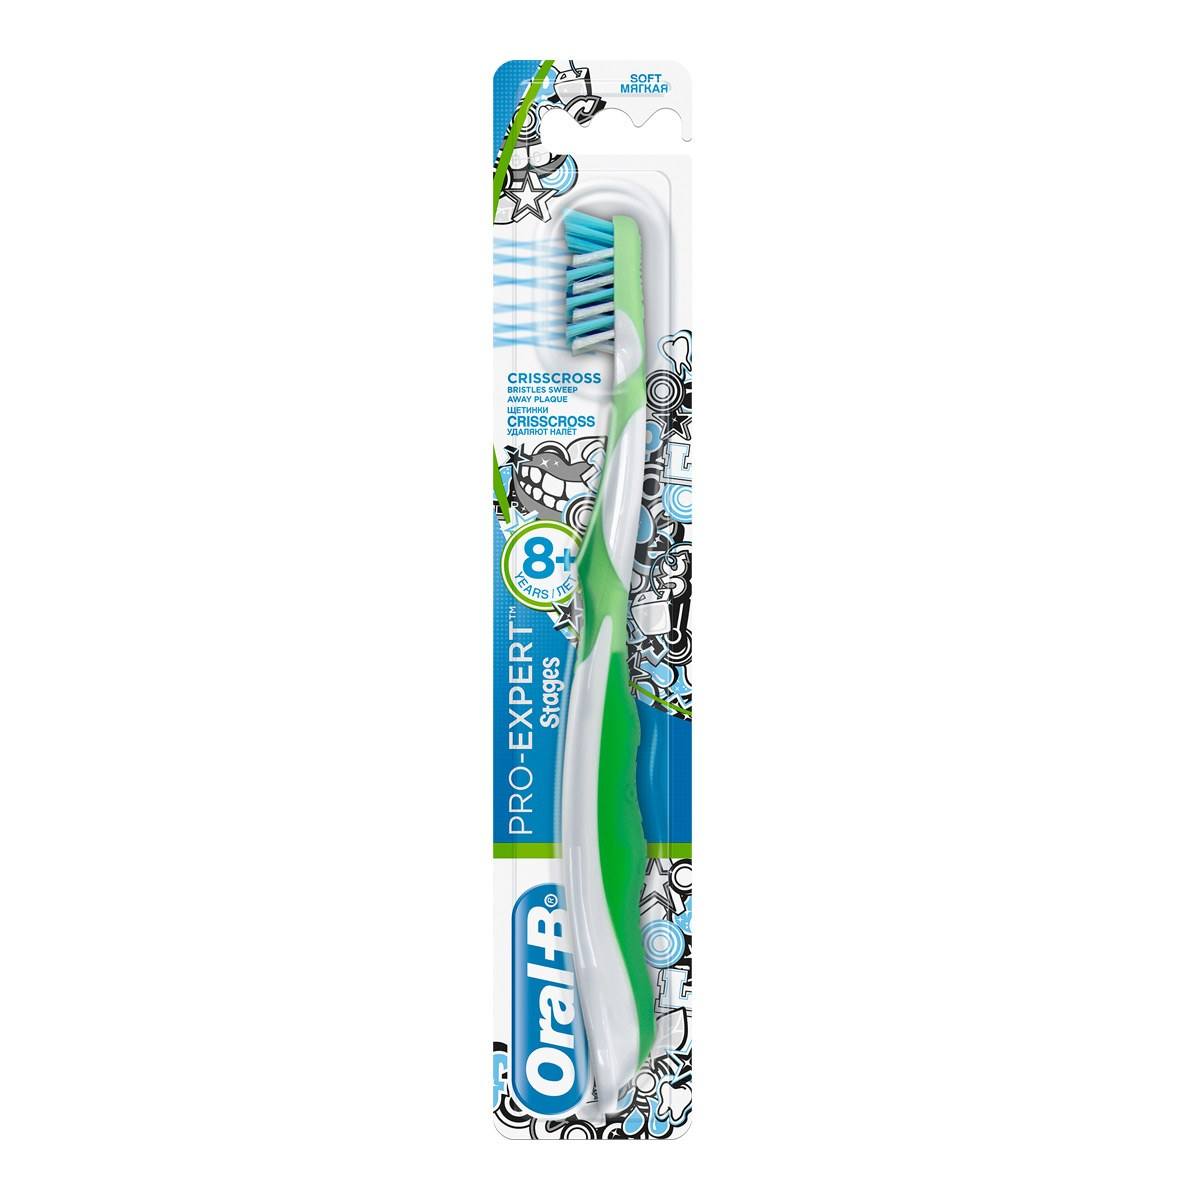 Oral-B Stages 4 Stargate toothbrush (8 years+) | Oral-B